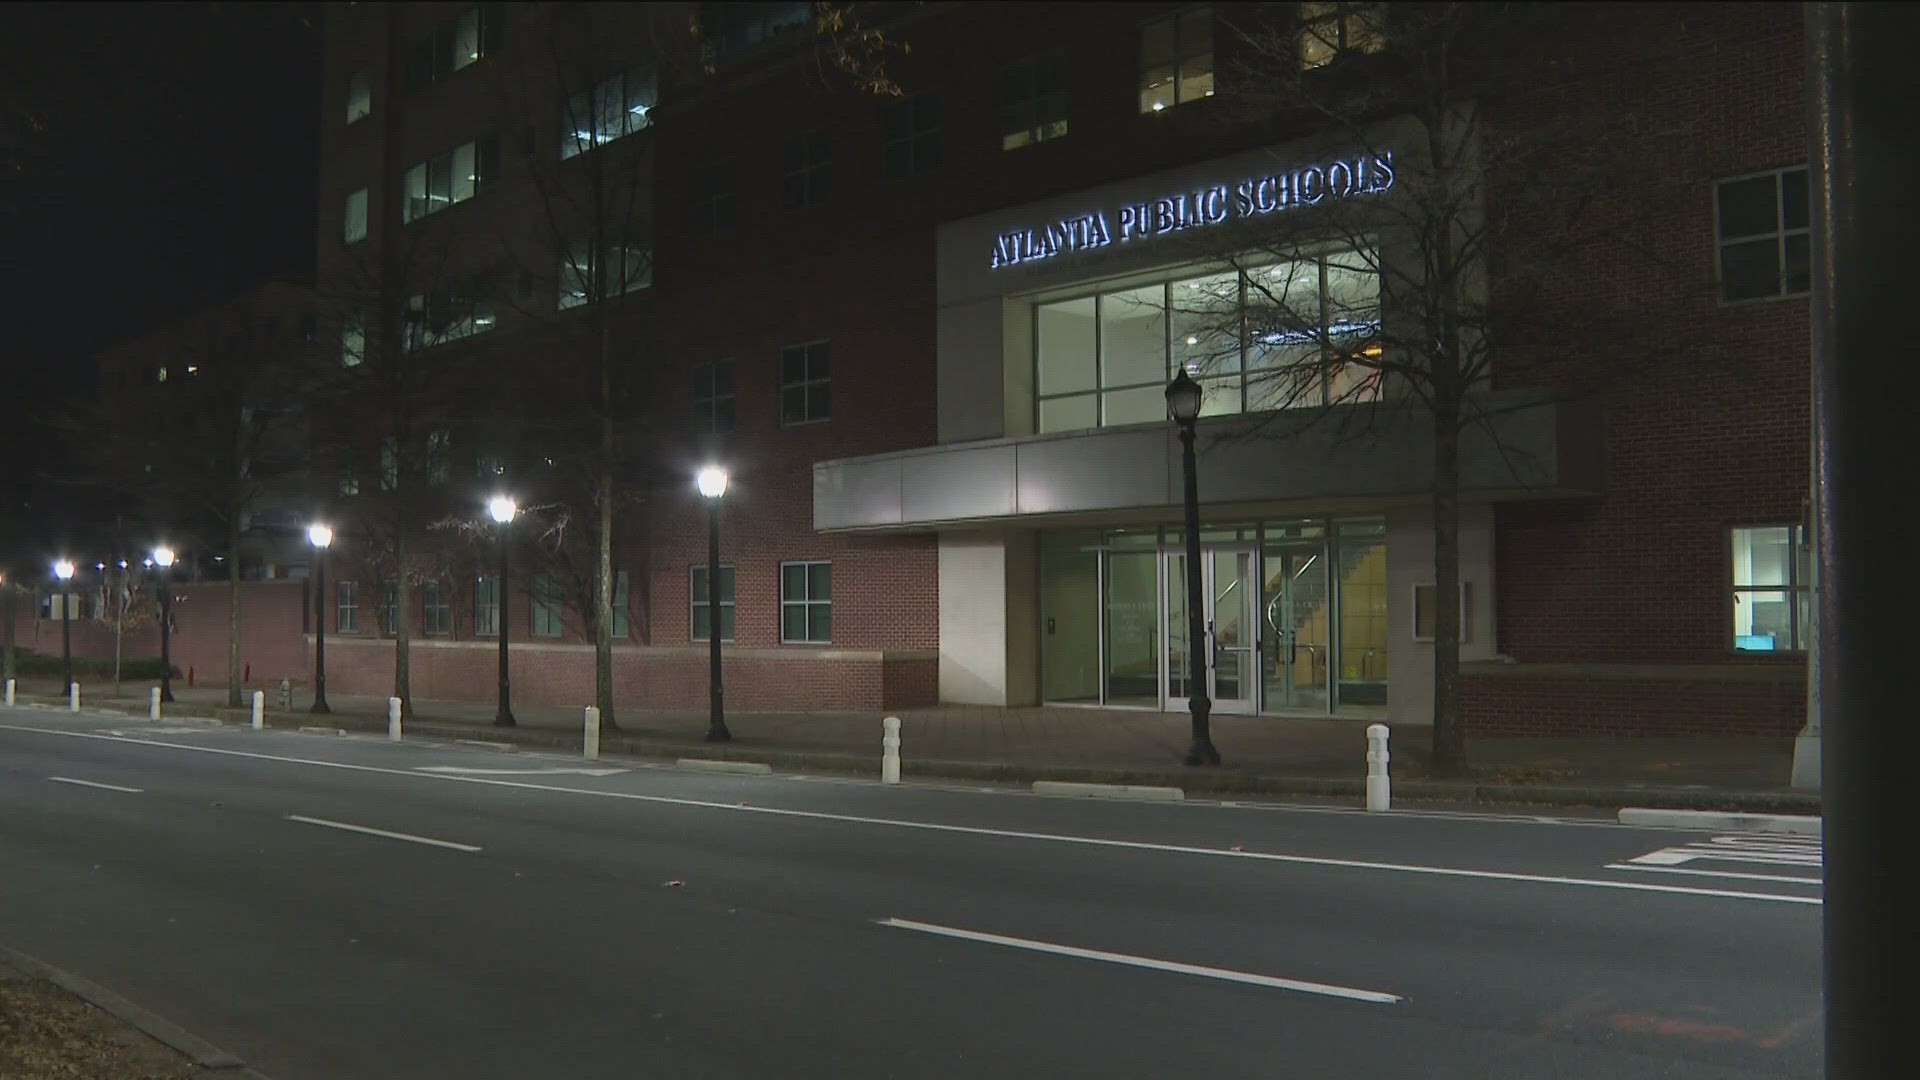 The Atlanta Board of Education announced on Tuesday that it has decided to extend the search.